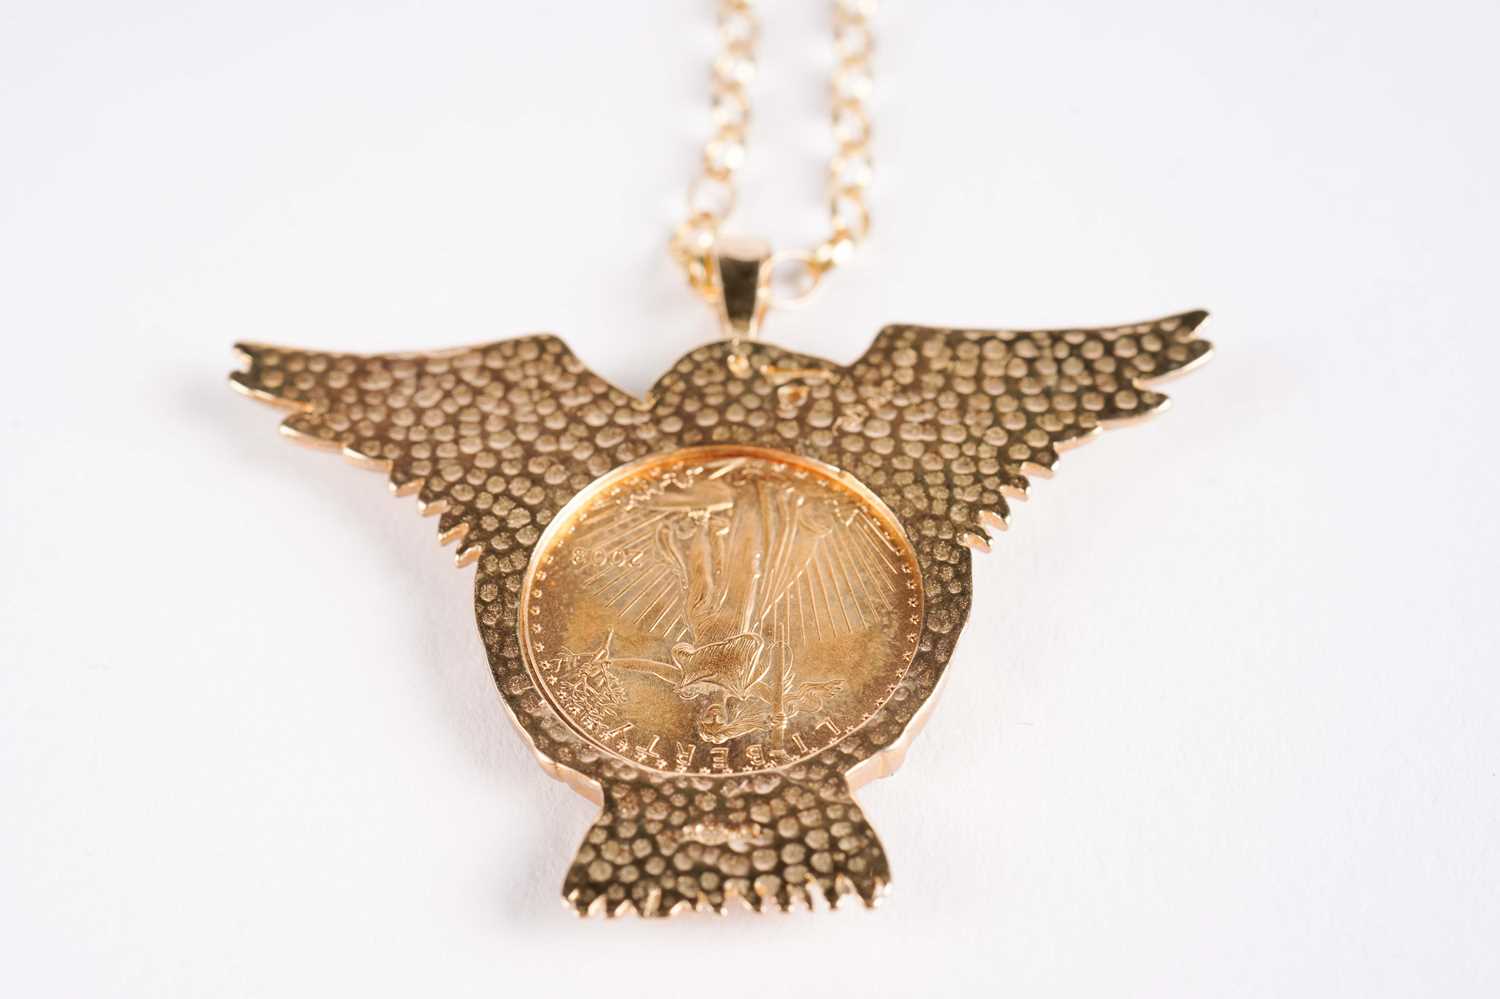 USA $5 dollar coin in pendant mount, on chain - Image 2 of 3